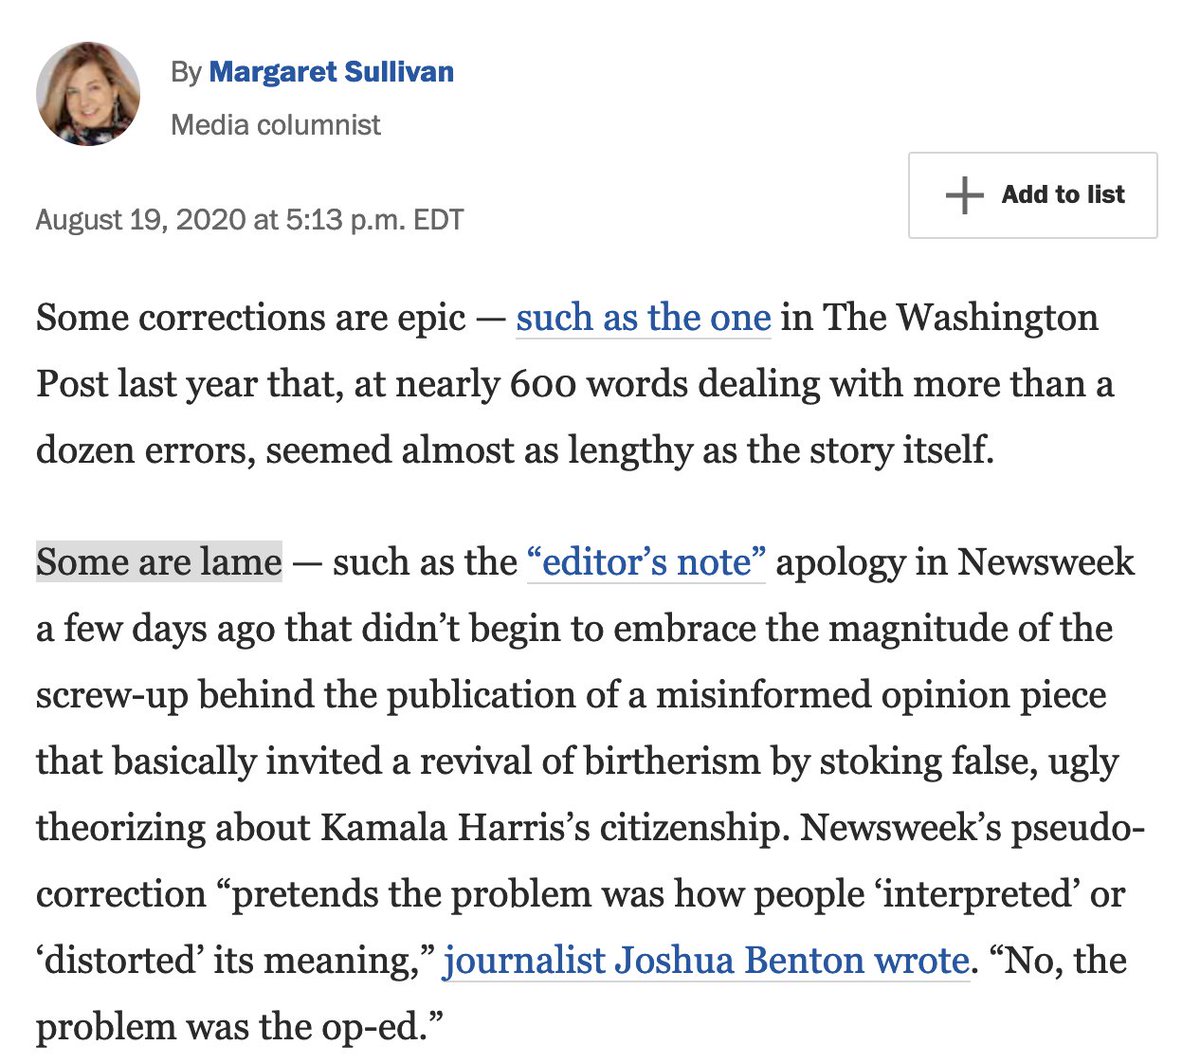 Damn it. Why do media critics like  @Sulliview and  @NPRpubliceditor  @kellymcb get to use "lame" without ever having to respond? "Lame" is ableist, akin to using "gay" or "ghetto" as a perjorative. And yet top media cops at  @NPR  @washingtonpost use it without care.